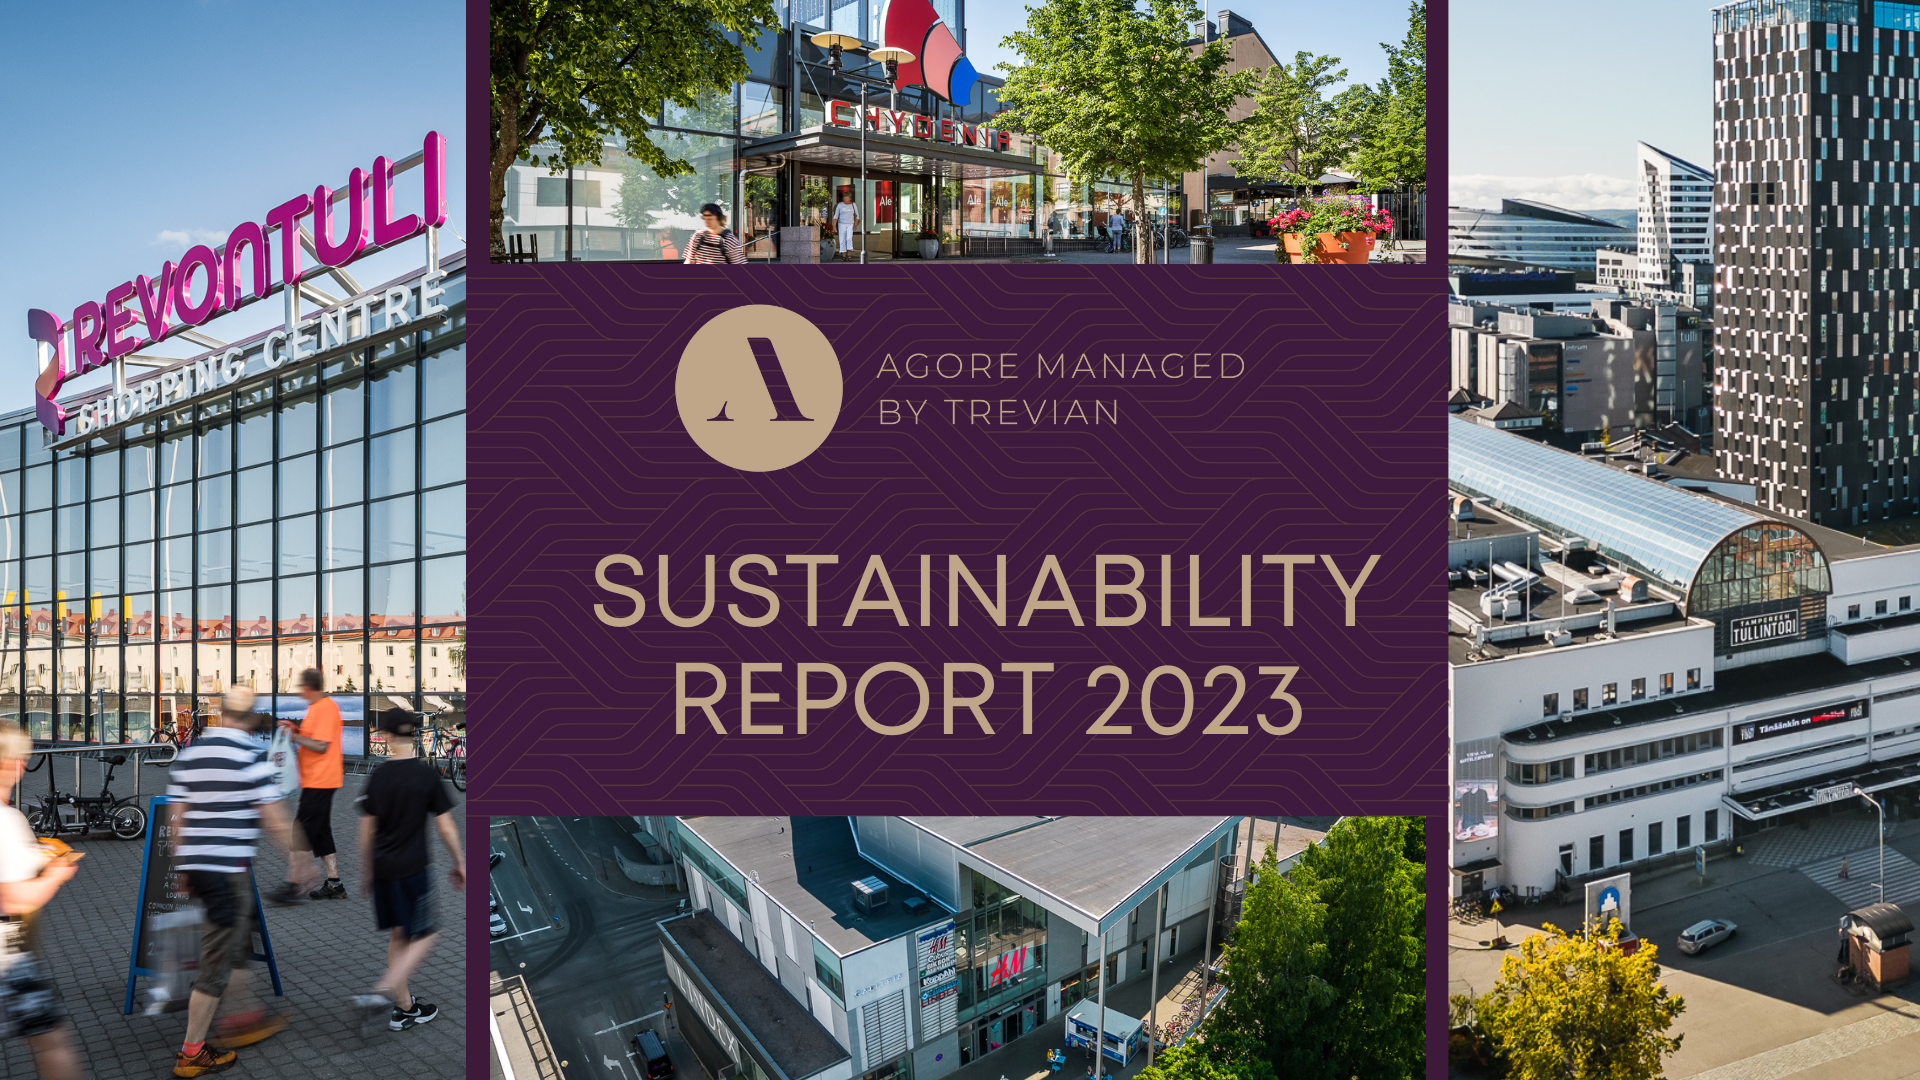 Featured image for “Agore Properties continues progress through its core values in newly published Sustainability Report”